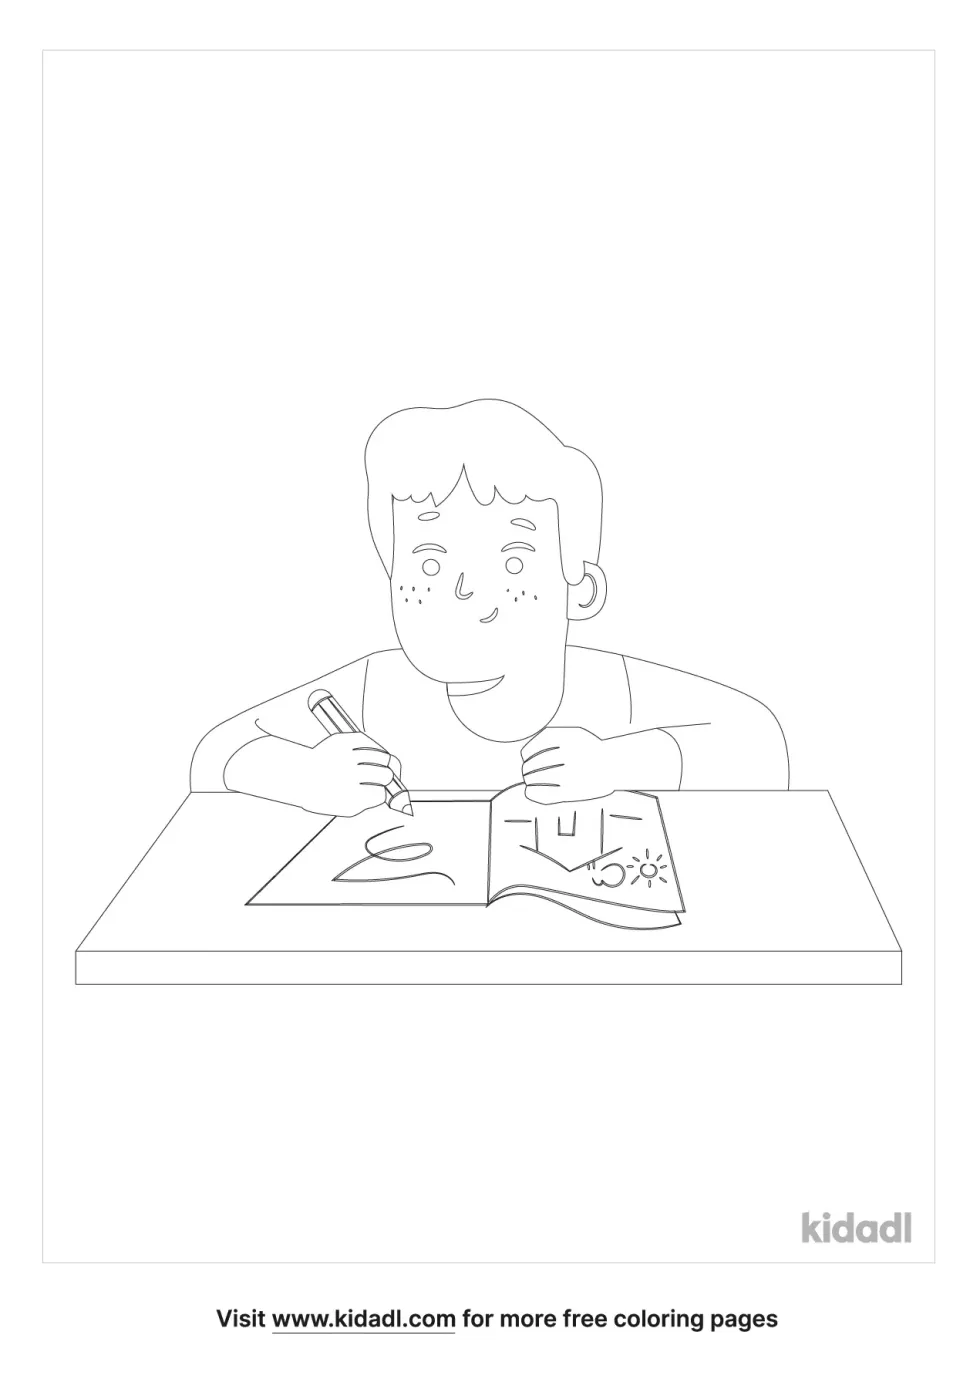 Student At Desk Folded Arms On Desk Coloring Page